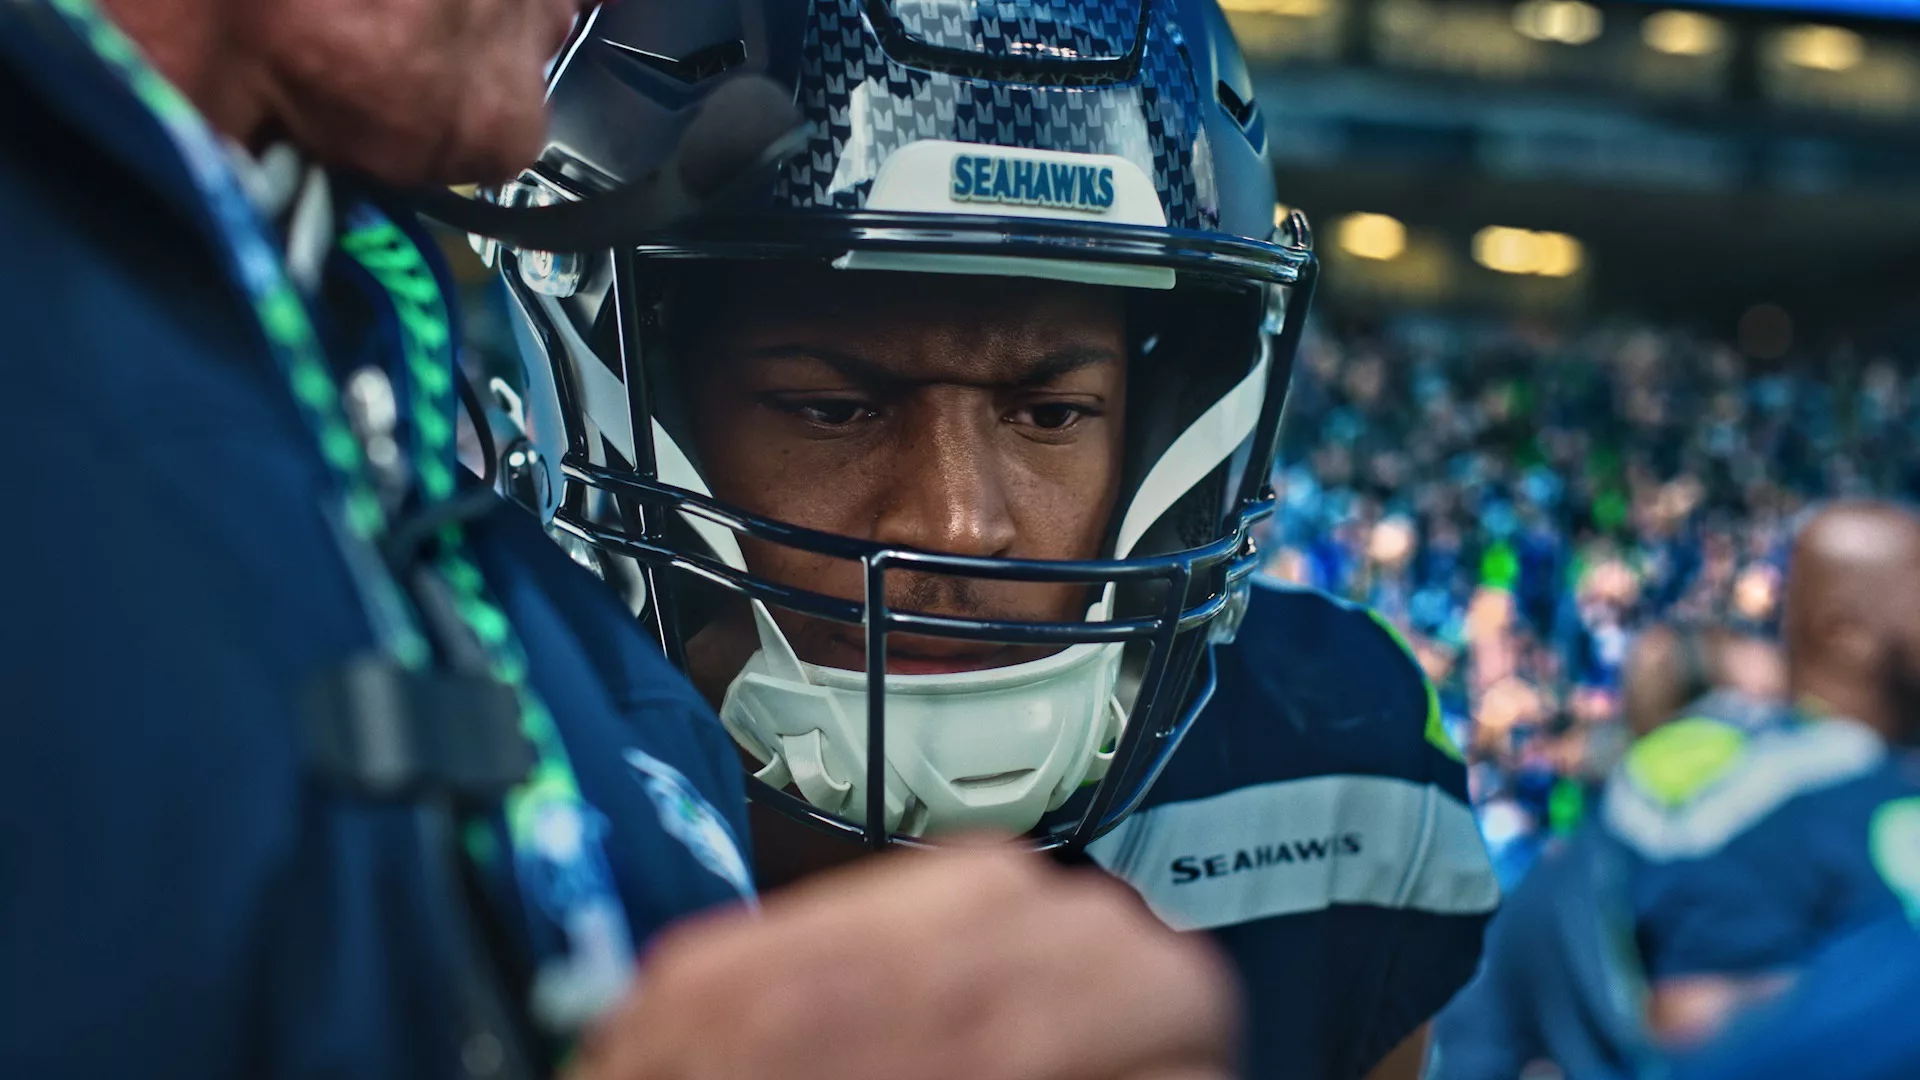 Close up portrait of NFL player Tyler Lockett looking pensive while wearing his helmet and jersey. A blurry crowd of fans are in the background.